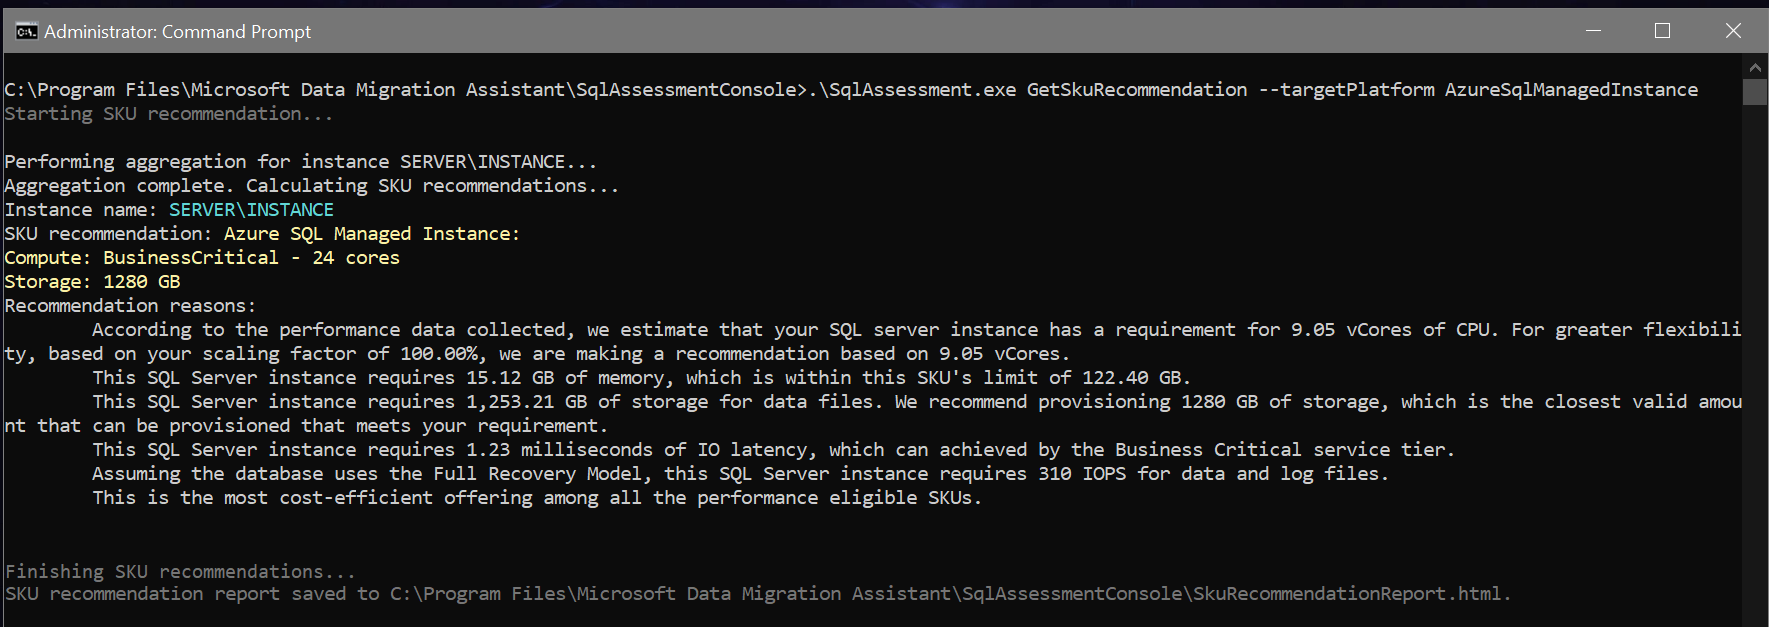 Screenshot of Azure SQL Managed Instance SKU tier and size recommendations shown in console.